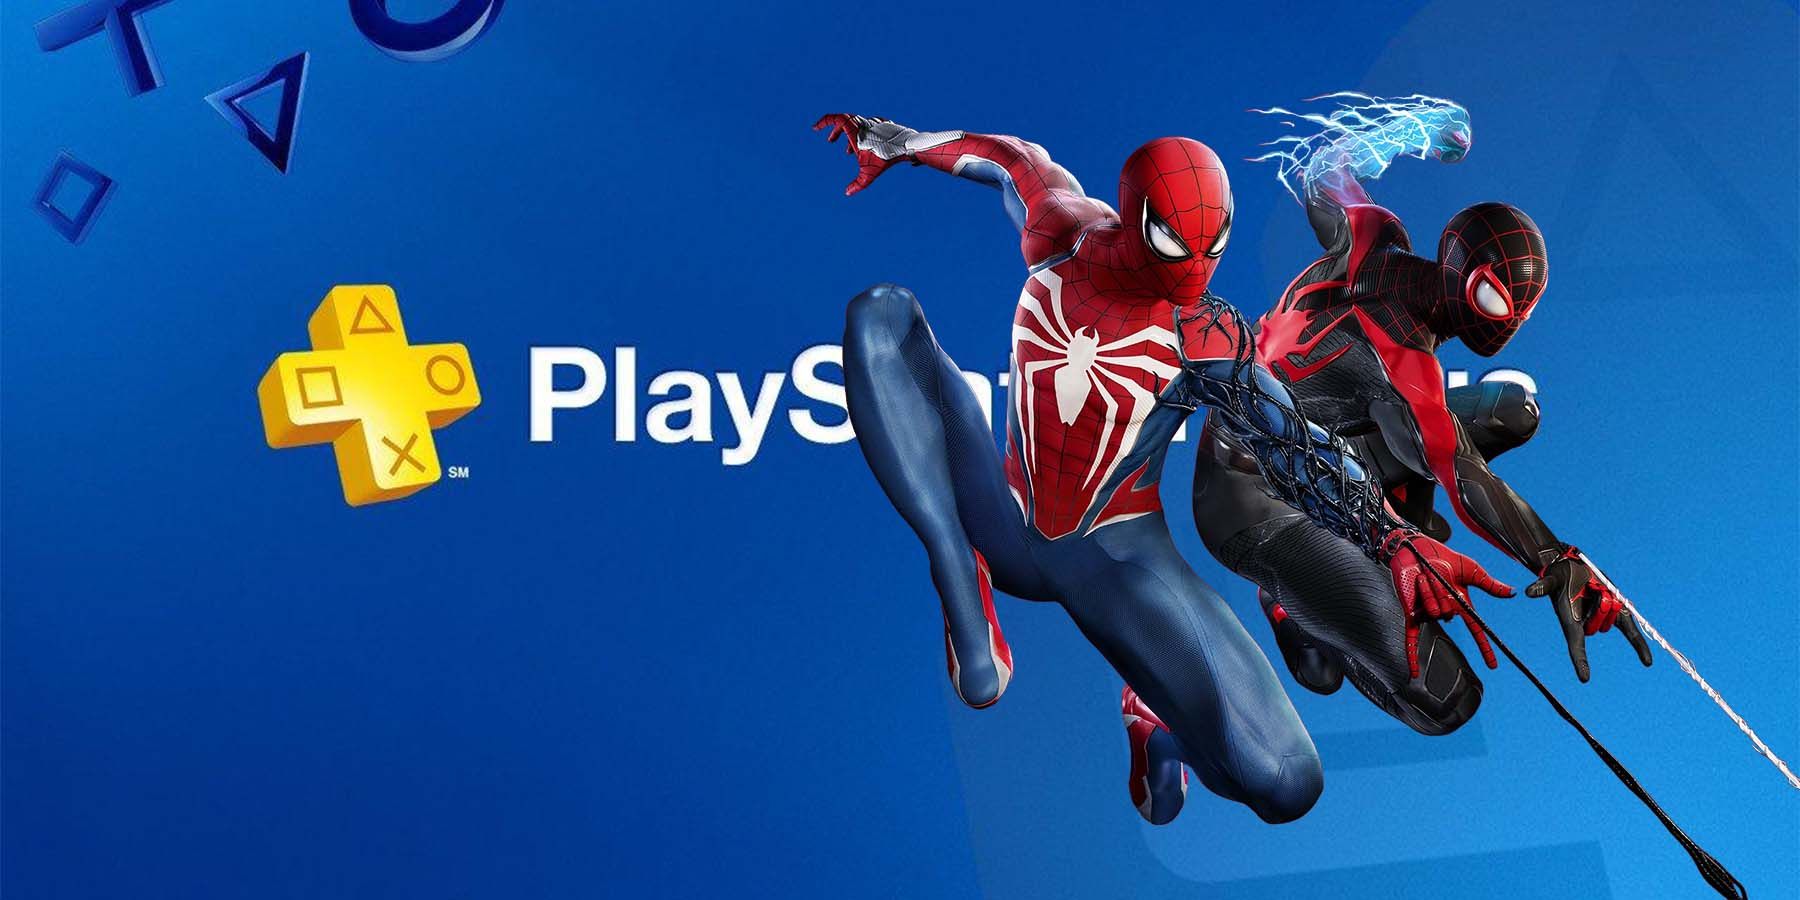 PS Plus price increase is not going down well - Video Games on